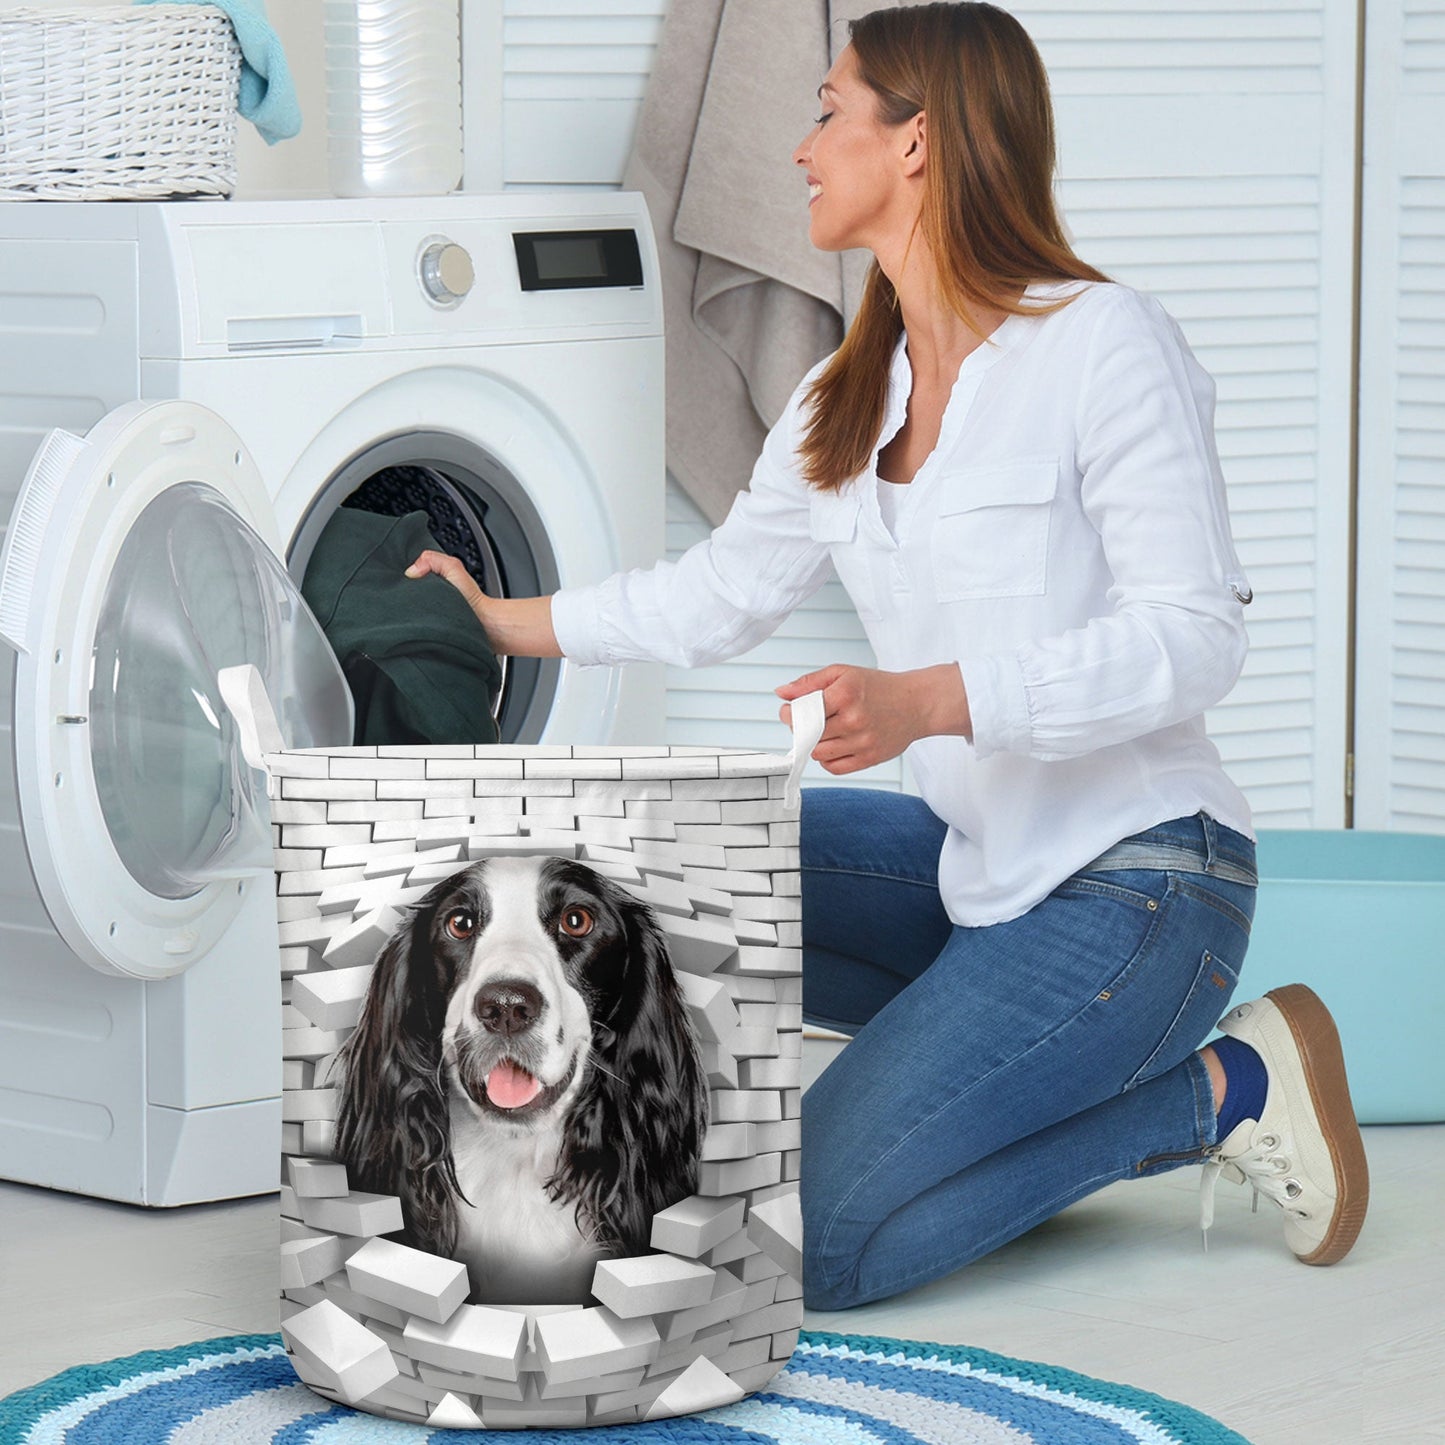 English Springer Spaniel - In The Hole Of Wall Pattern Laundry Basket